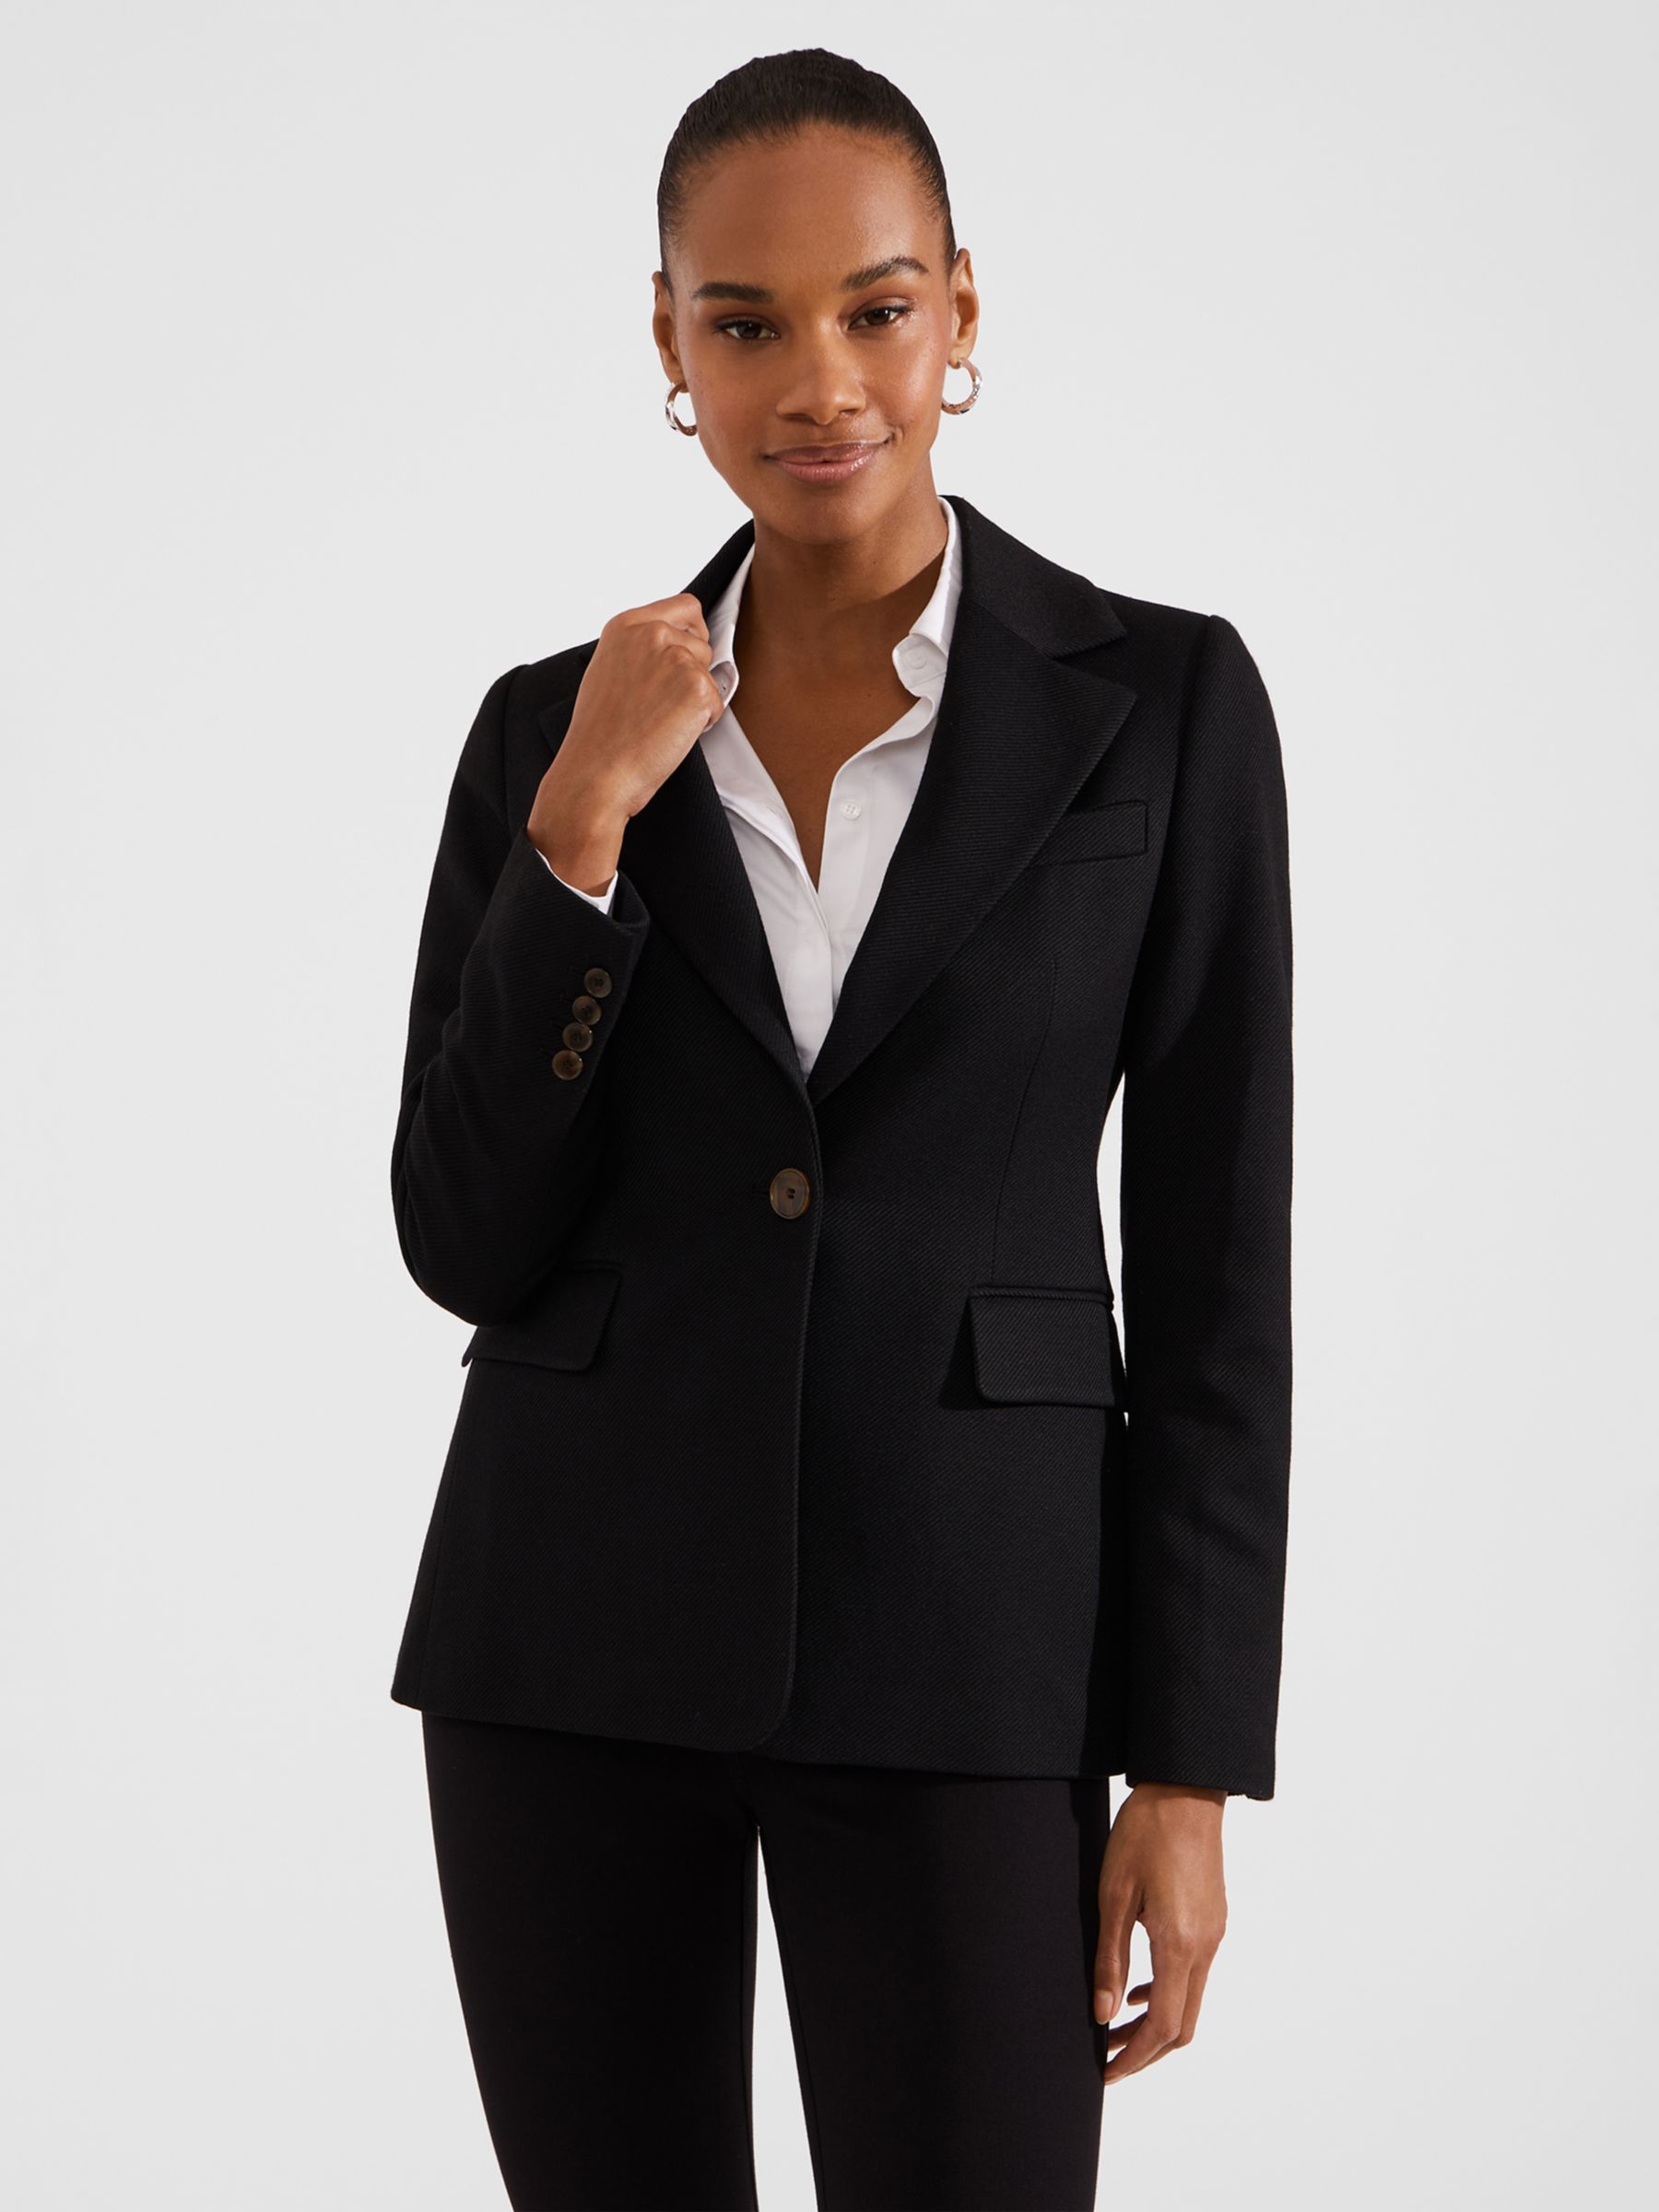 Womens Suits, Women's Suit Jackets & Trousers For Work, Hobbs London